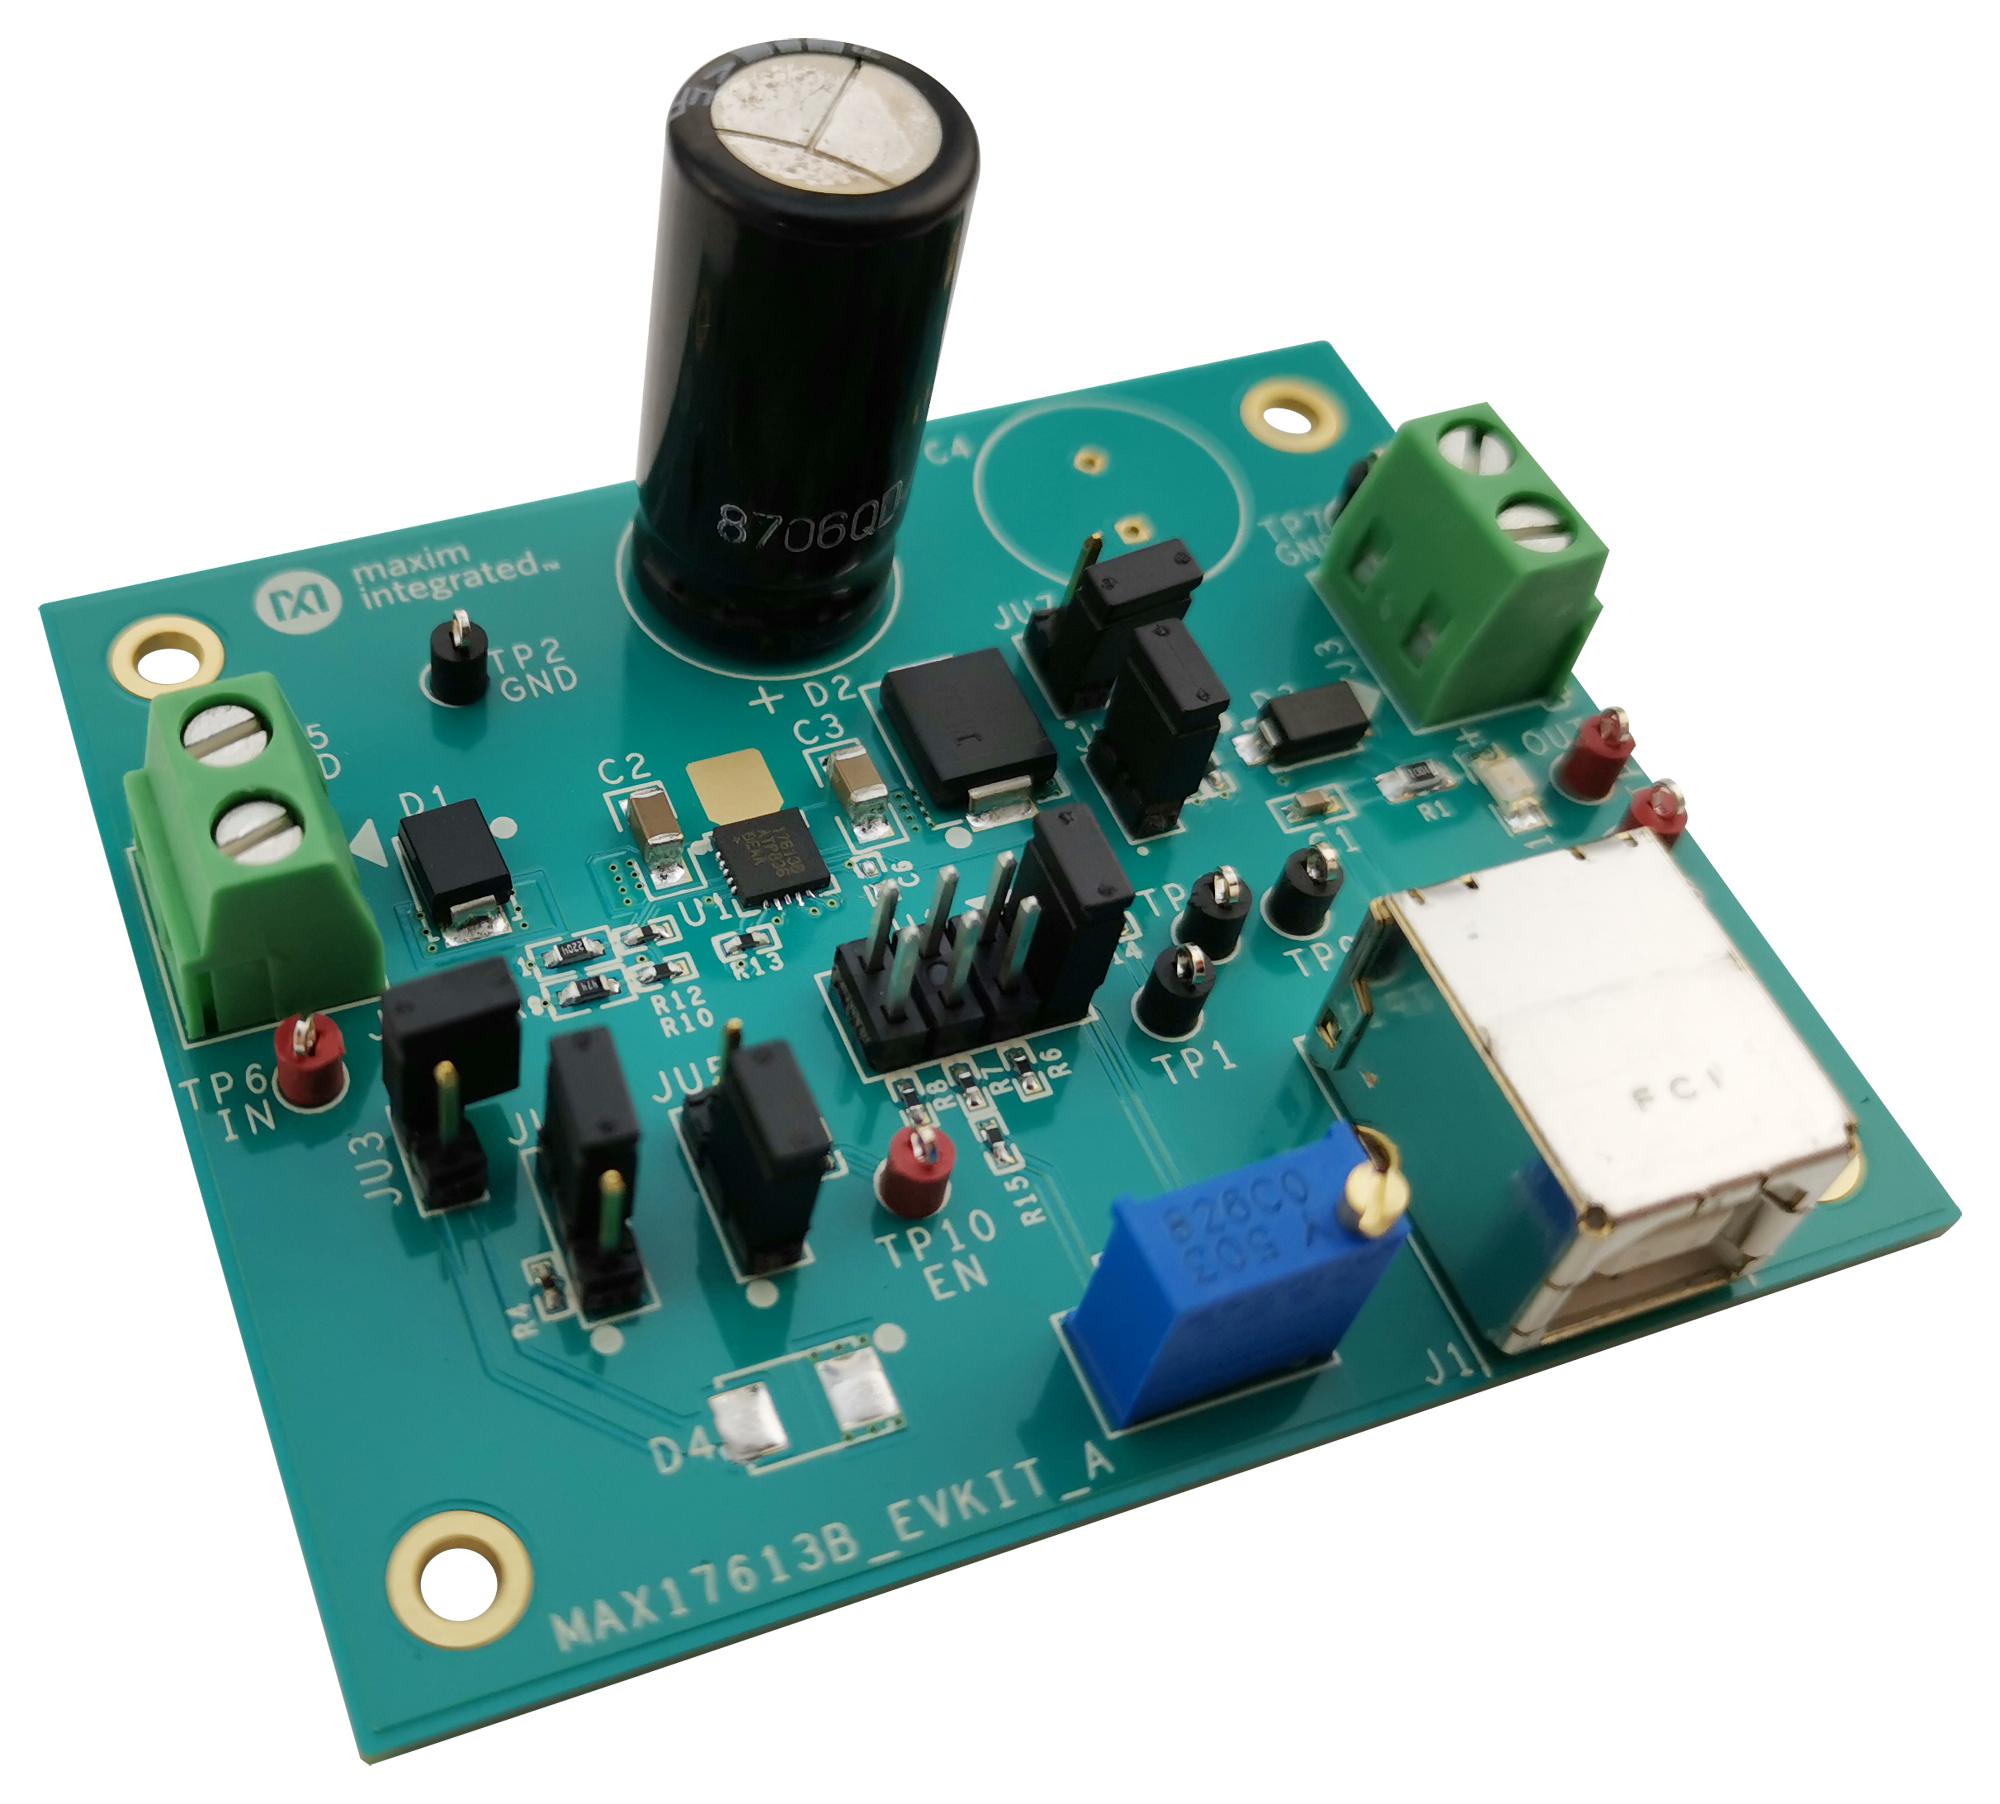 MAX17613BEVKIT# EVAL KIT, OVER & UNDERVOLTAGE PROTECTOR MAXIM INTEGRATED / ANALOG DEVICES